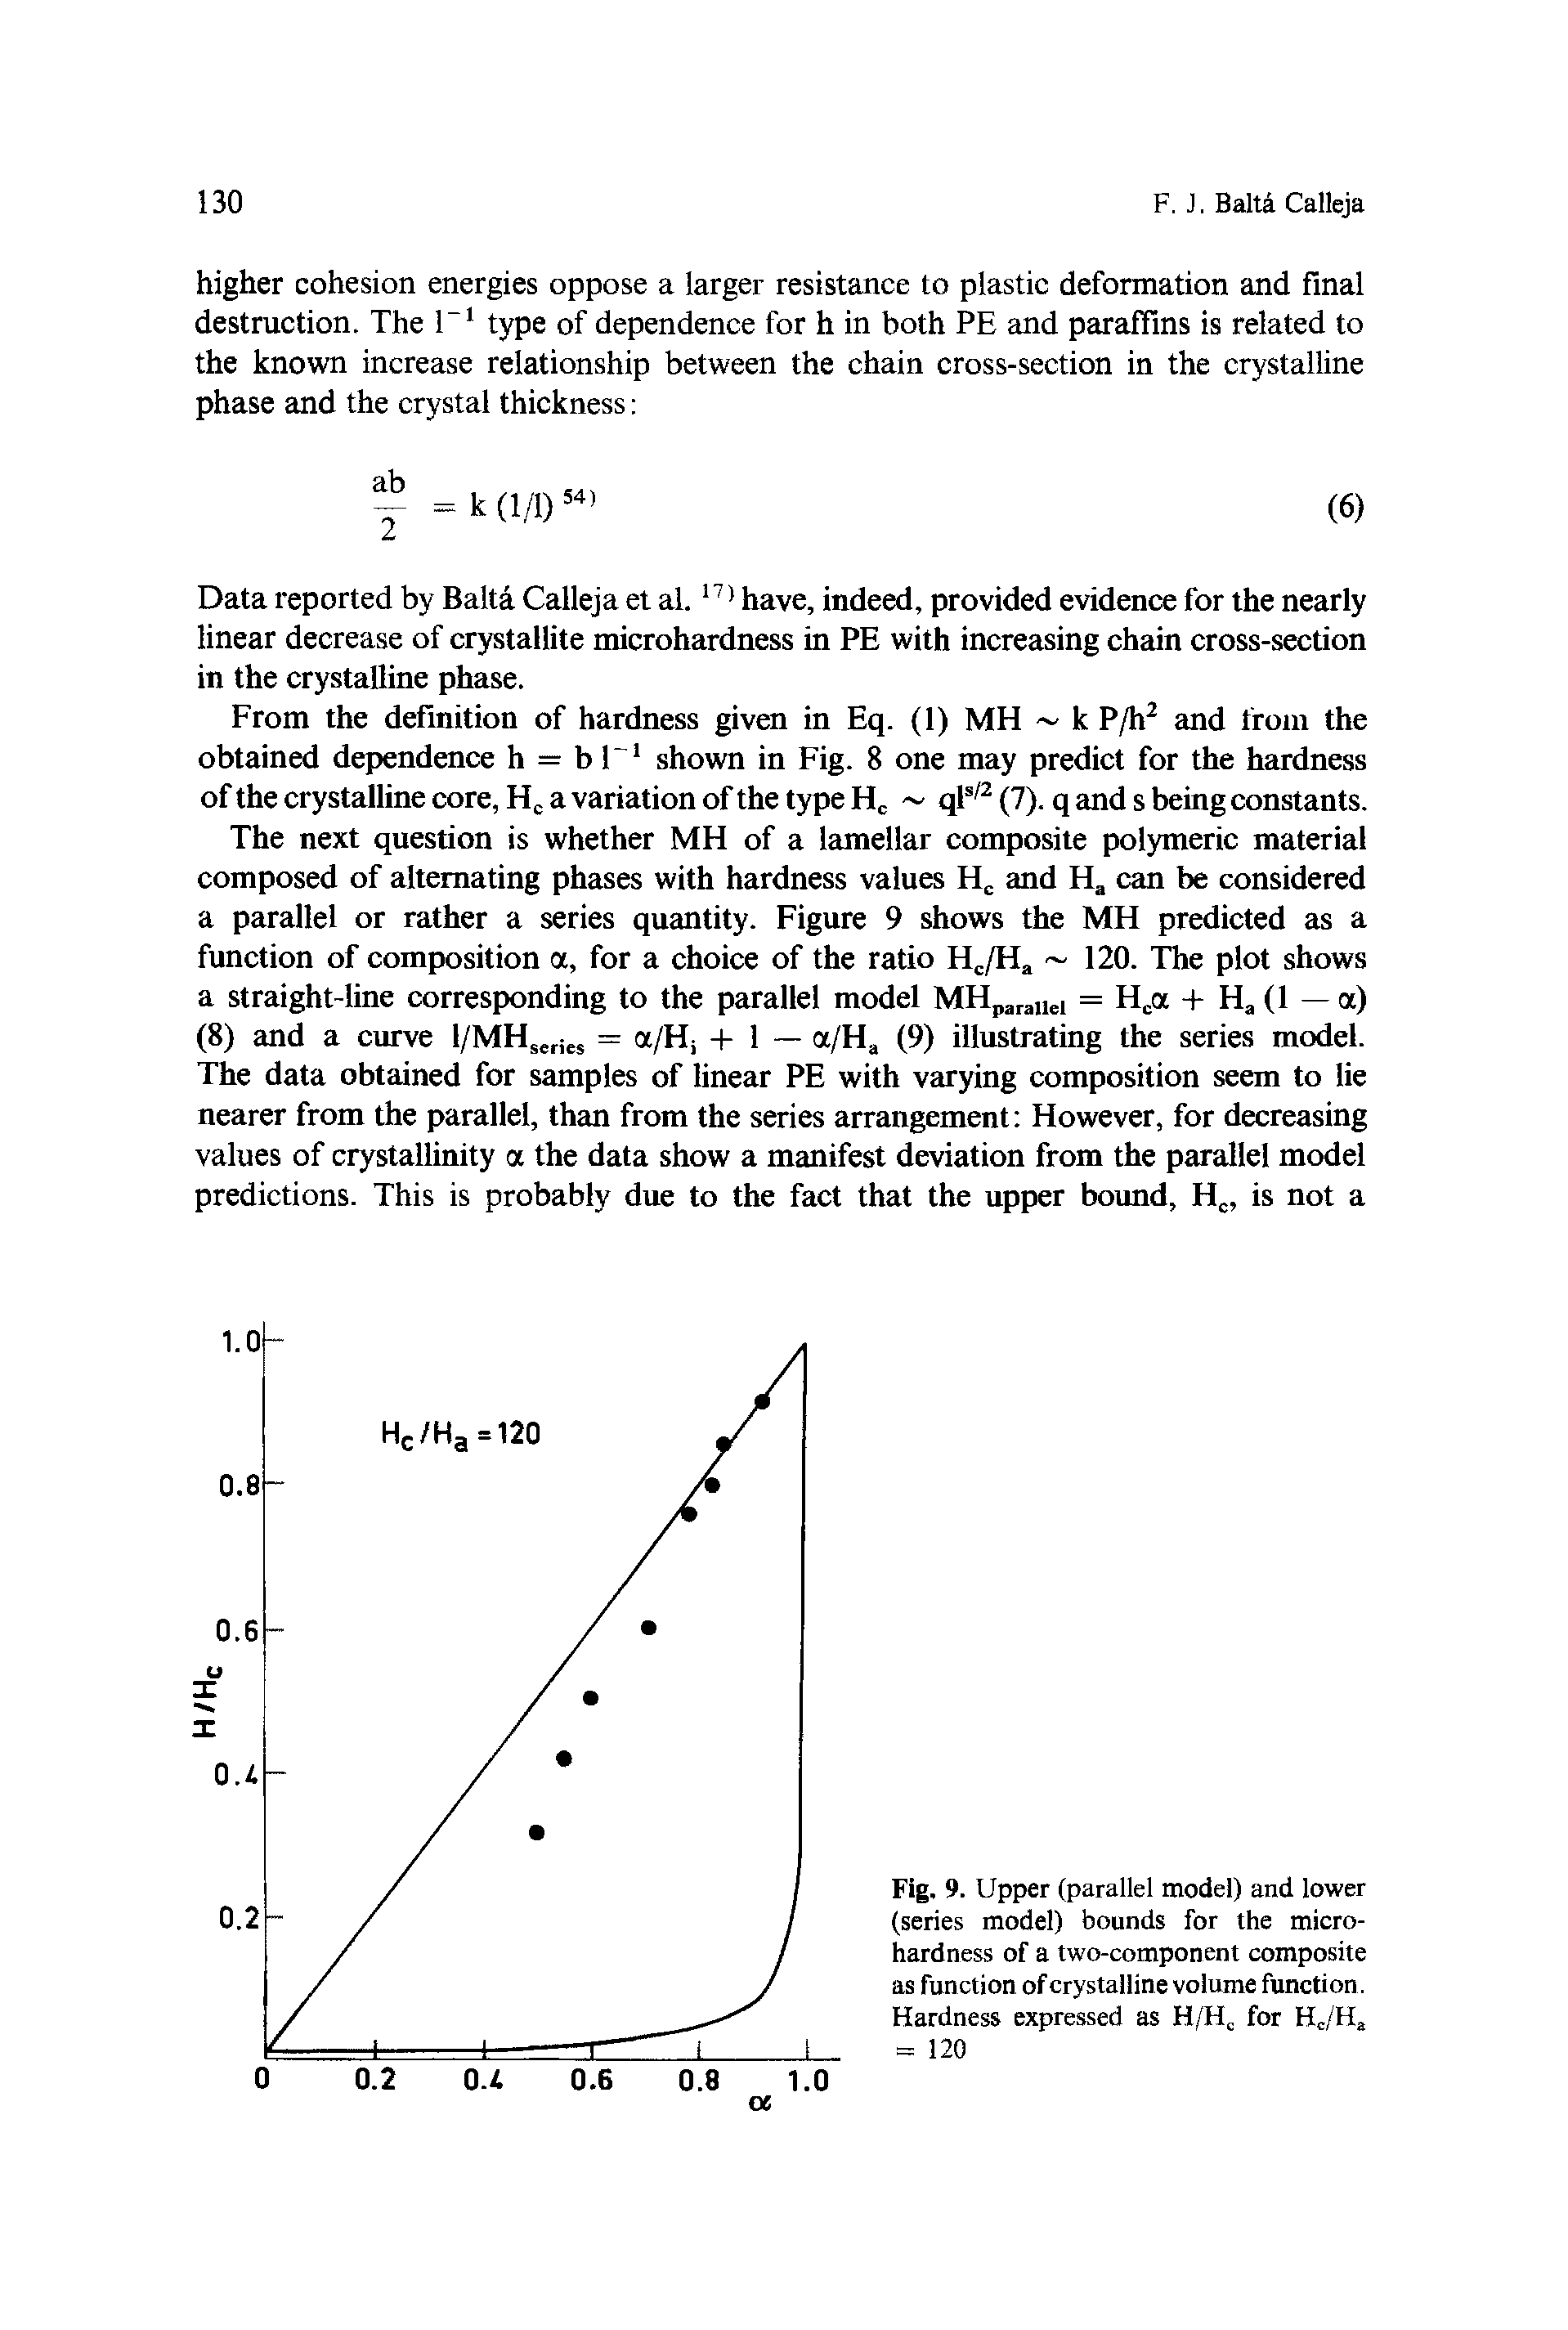 Fig. 9. Upper (parallel model) and lower (series model) bounds for the microhardness of a two-component composite as function of crystalline volume function. Hardness expressed as H/Hc for Hc/H = 120...